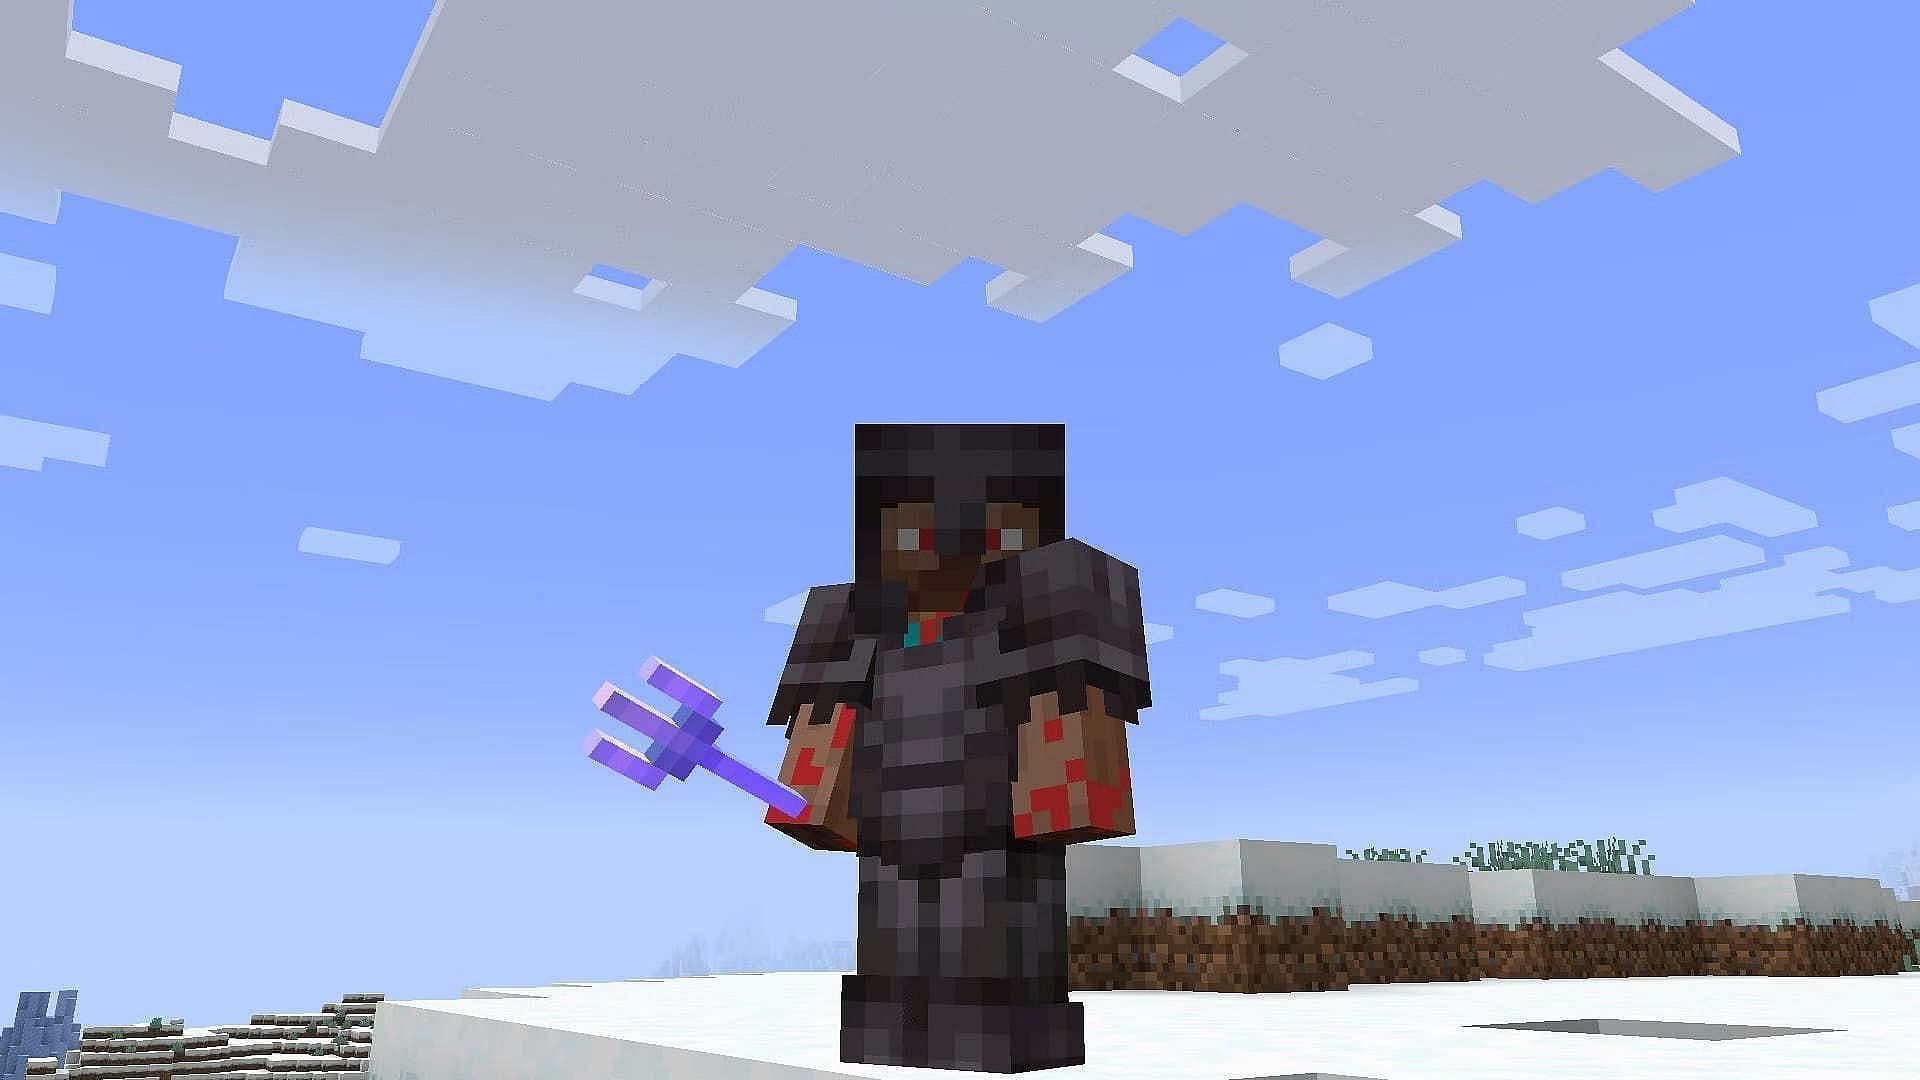 Best Minecraft armor enchantment guides - Thumbnail showing a character wearing netherite armor and holding a trident